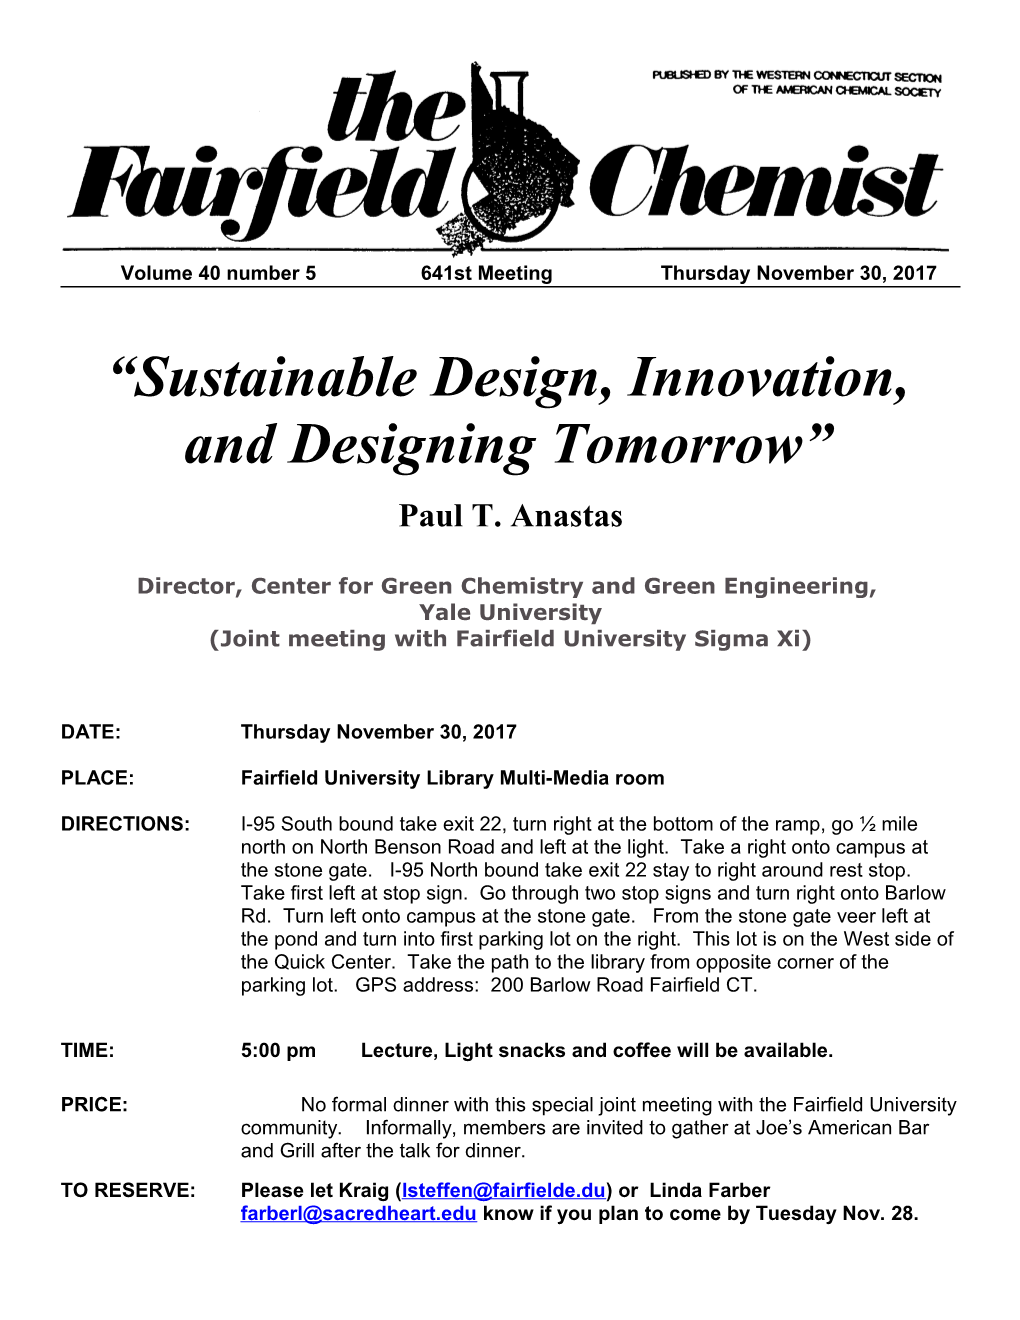 Sustainable Design, Innovation, and Designing Tomorrow